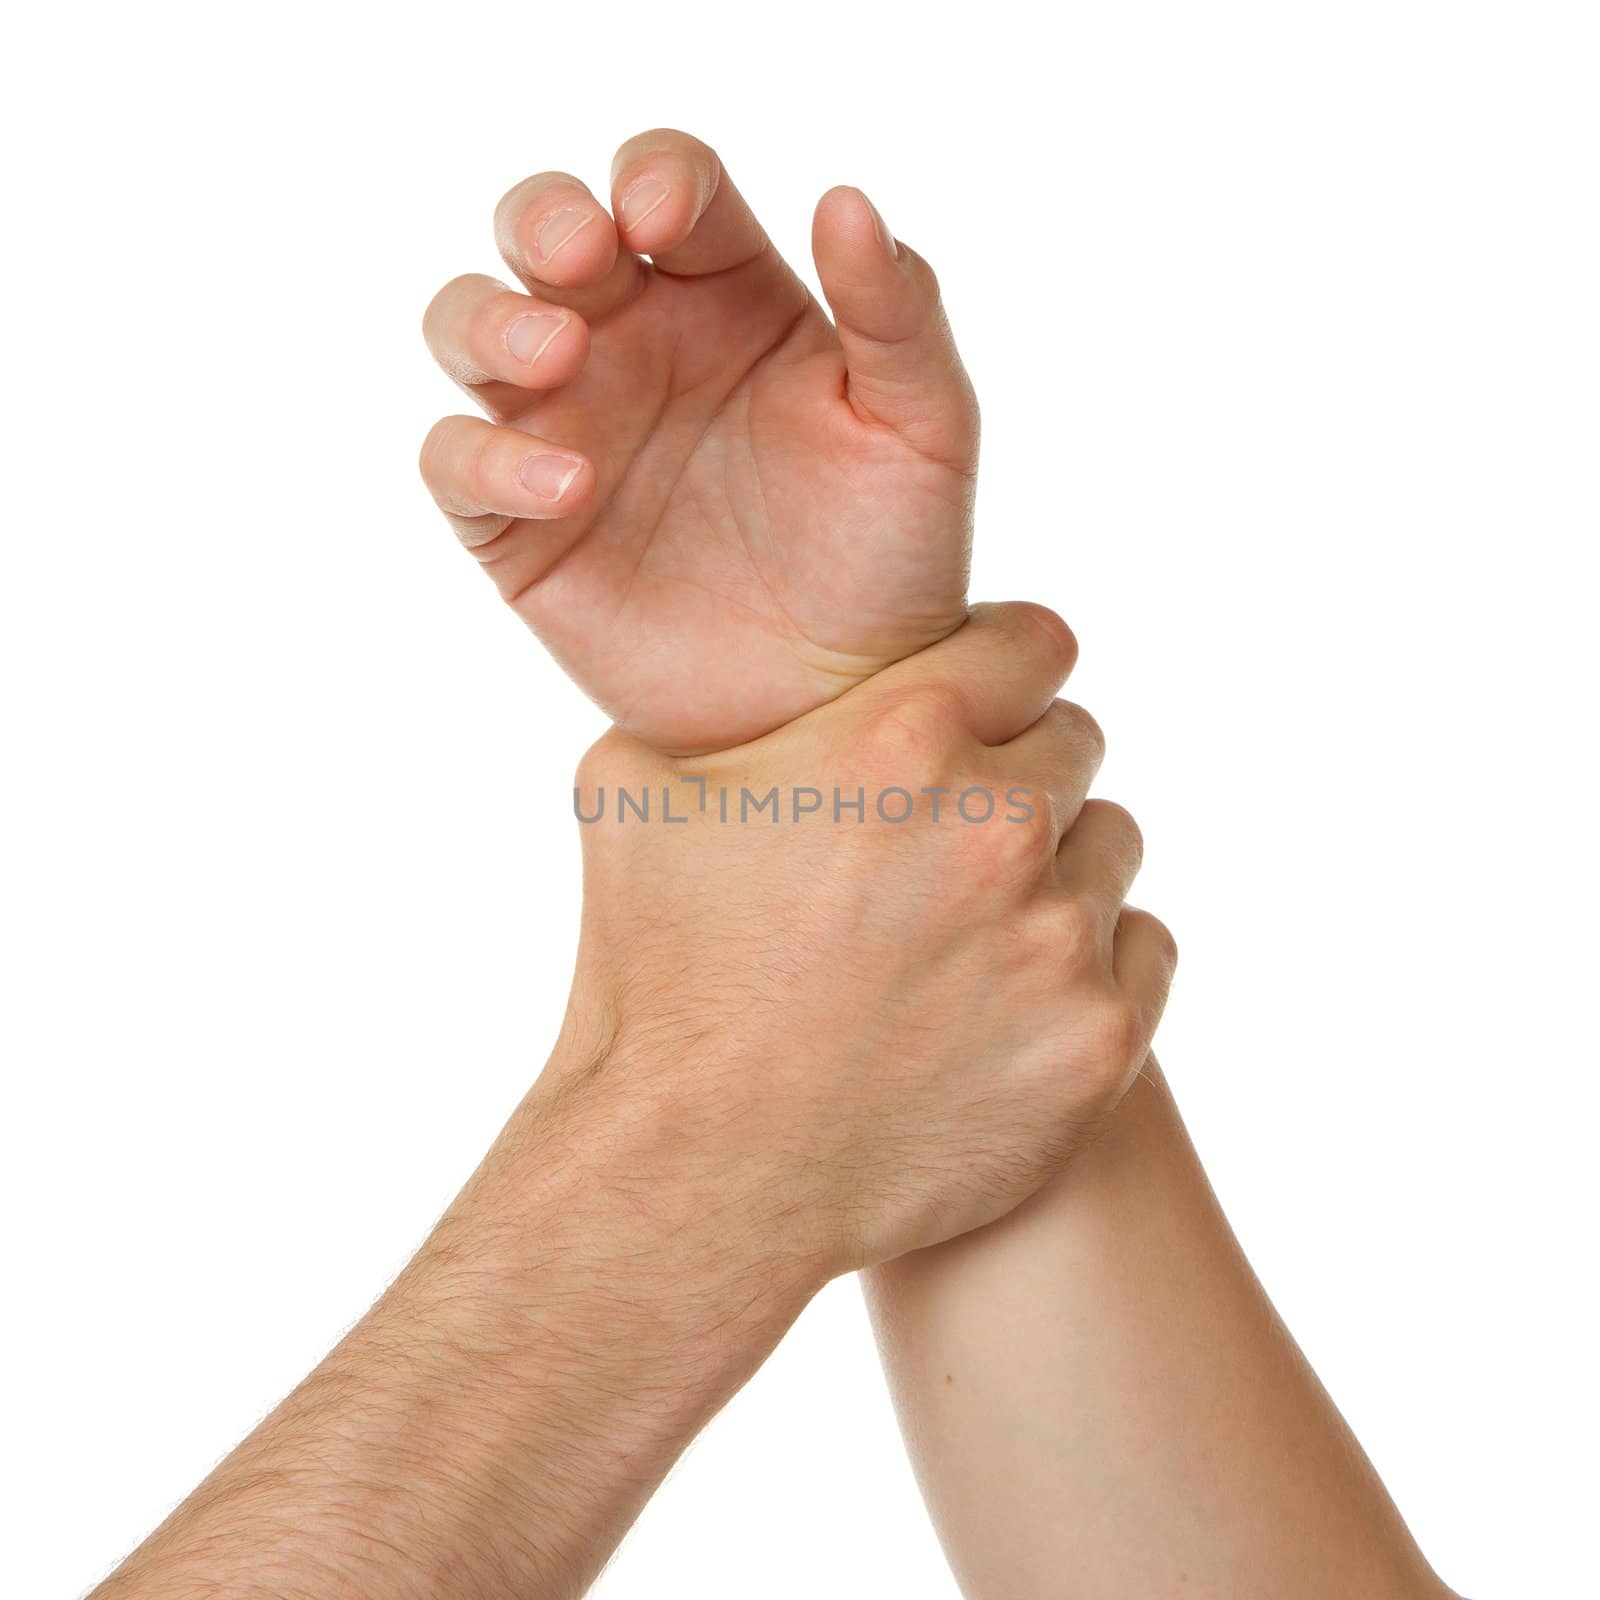 Man holding a woman by the wrist